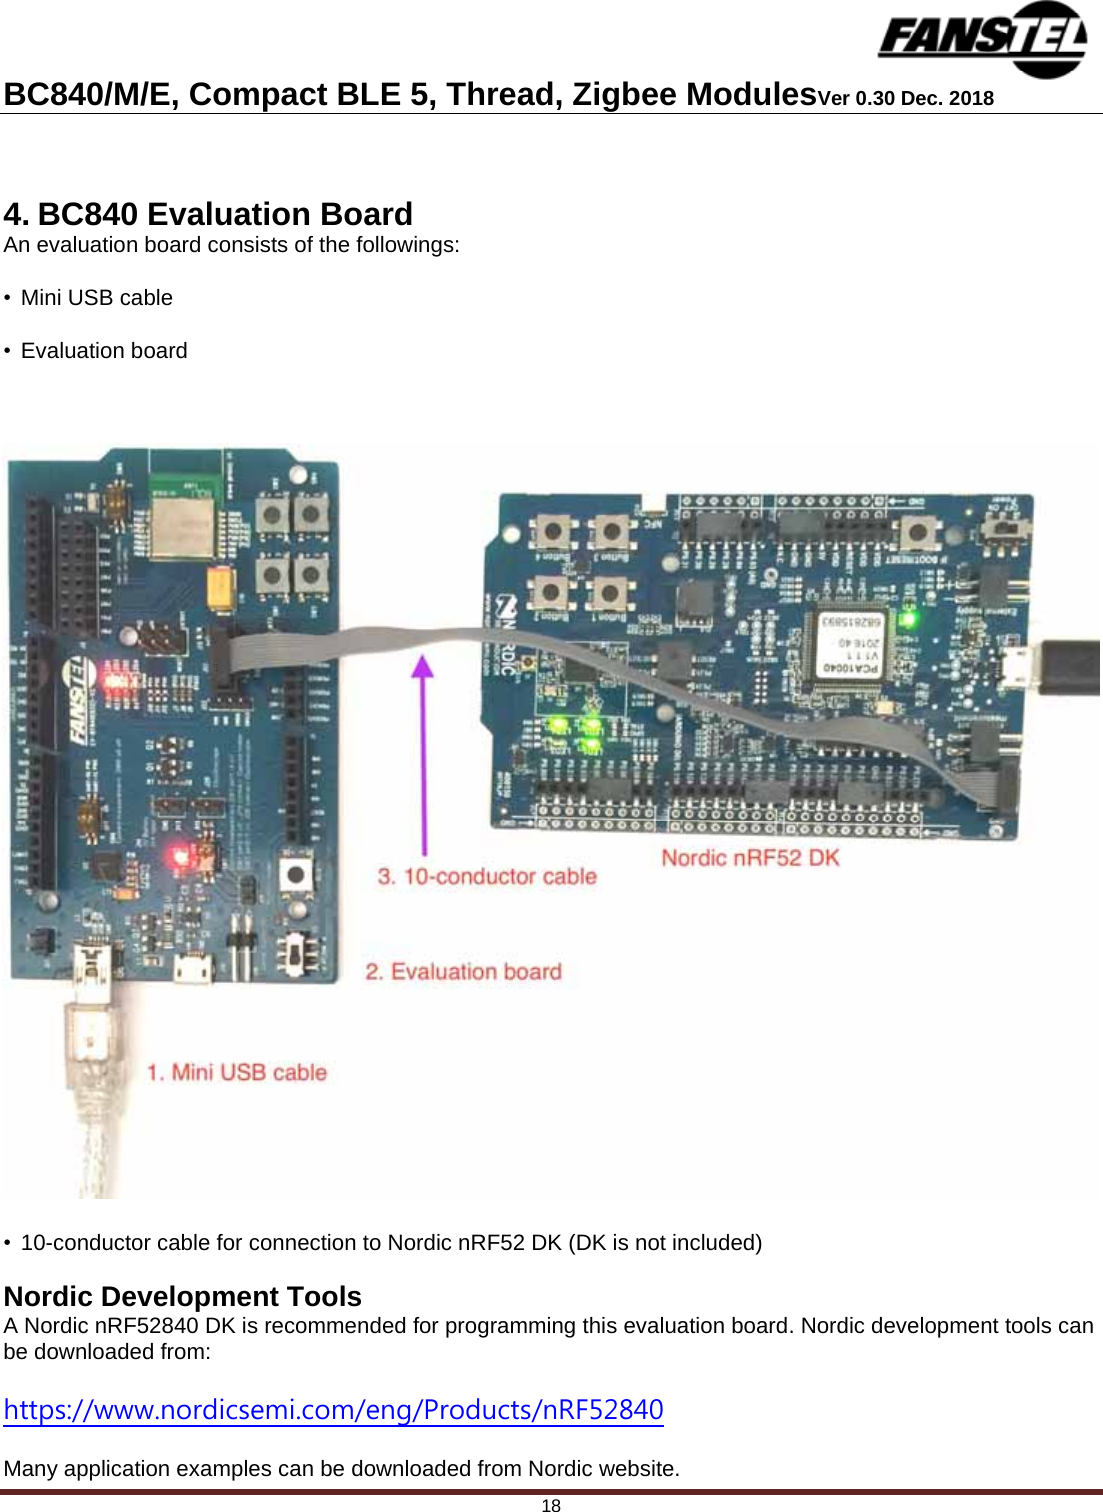 Page 18 of Fanstel Taipei BC840M Bluetooth 5.0 Module User Manual 